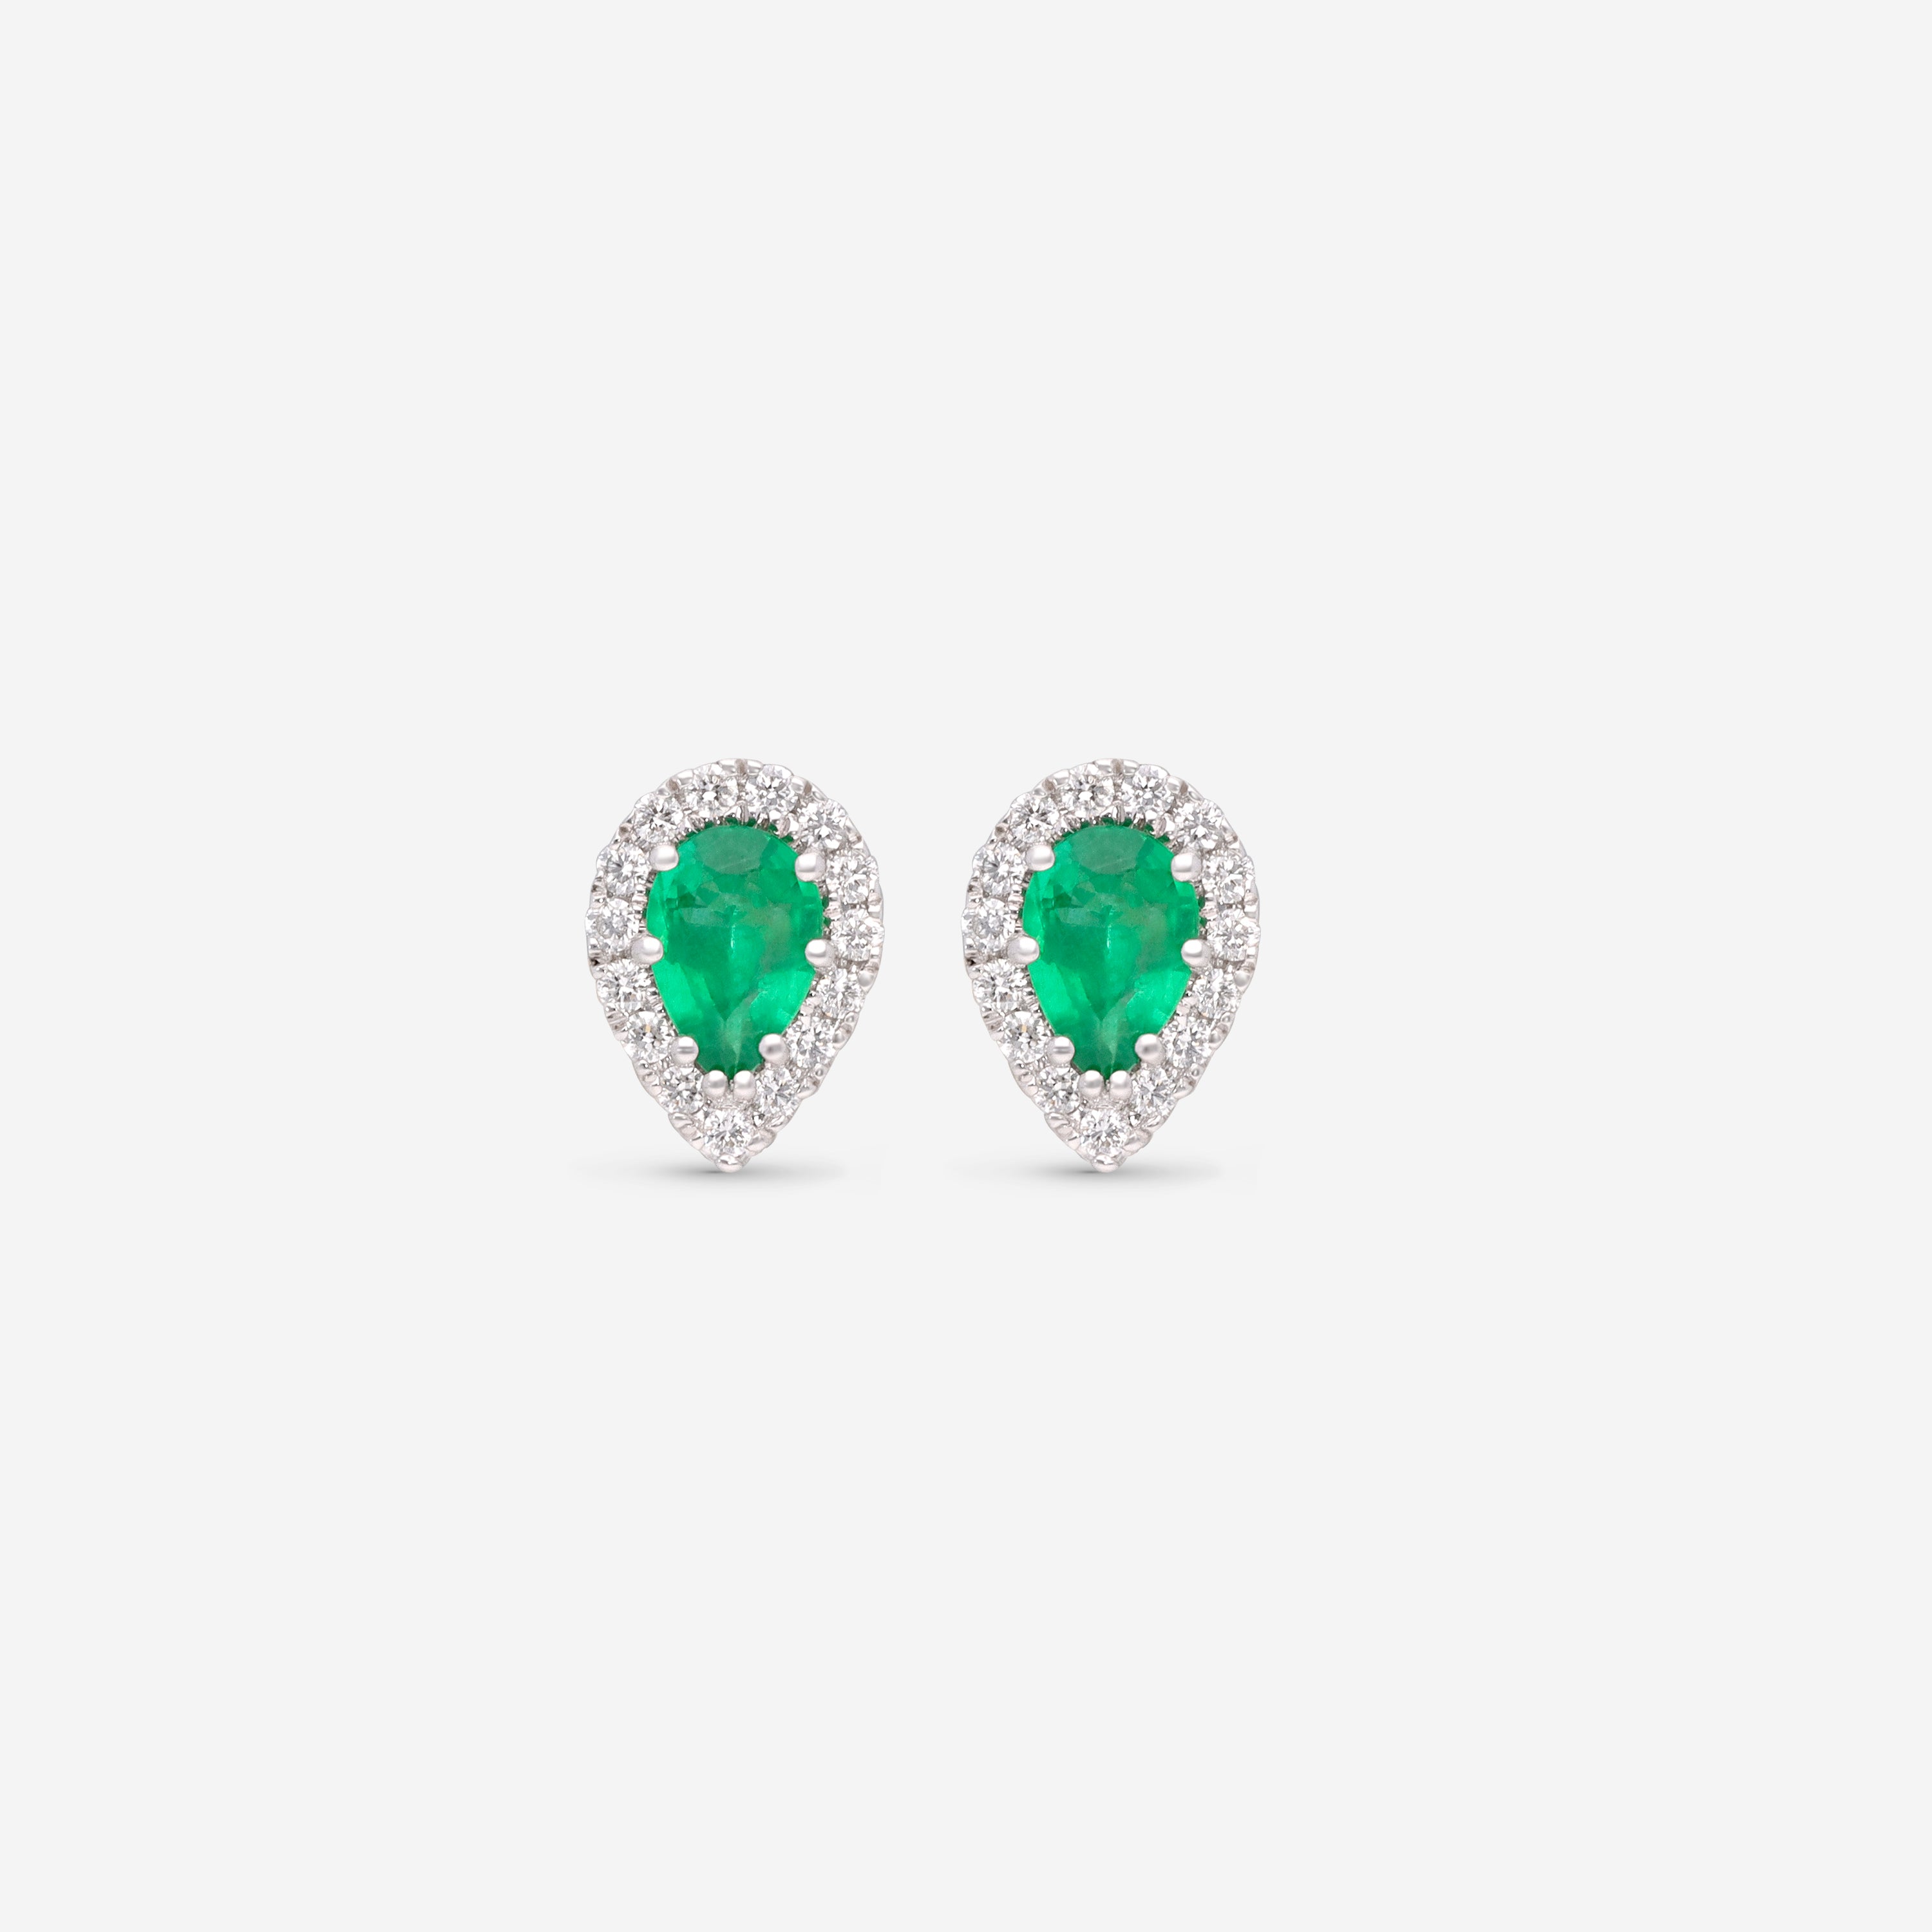 Ina Mar 14K White Gold Pear Shaped Emerald with Diamond Halo Stud Earrings